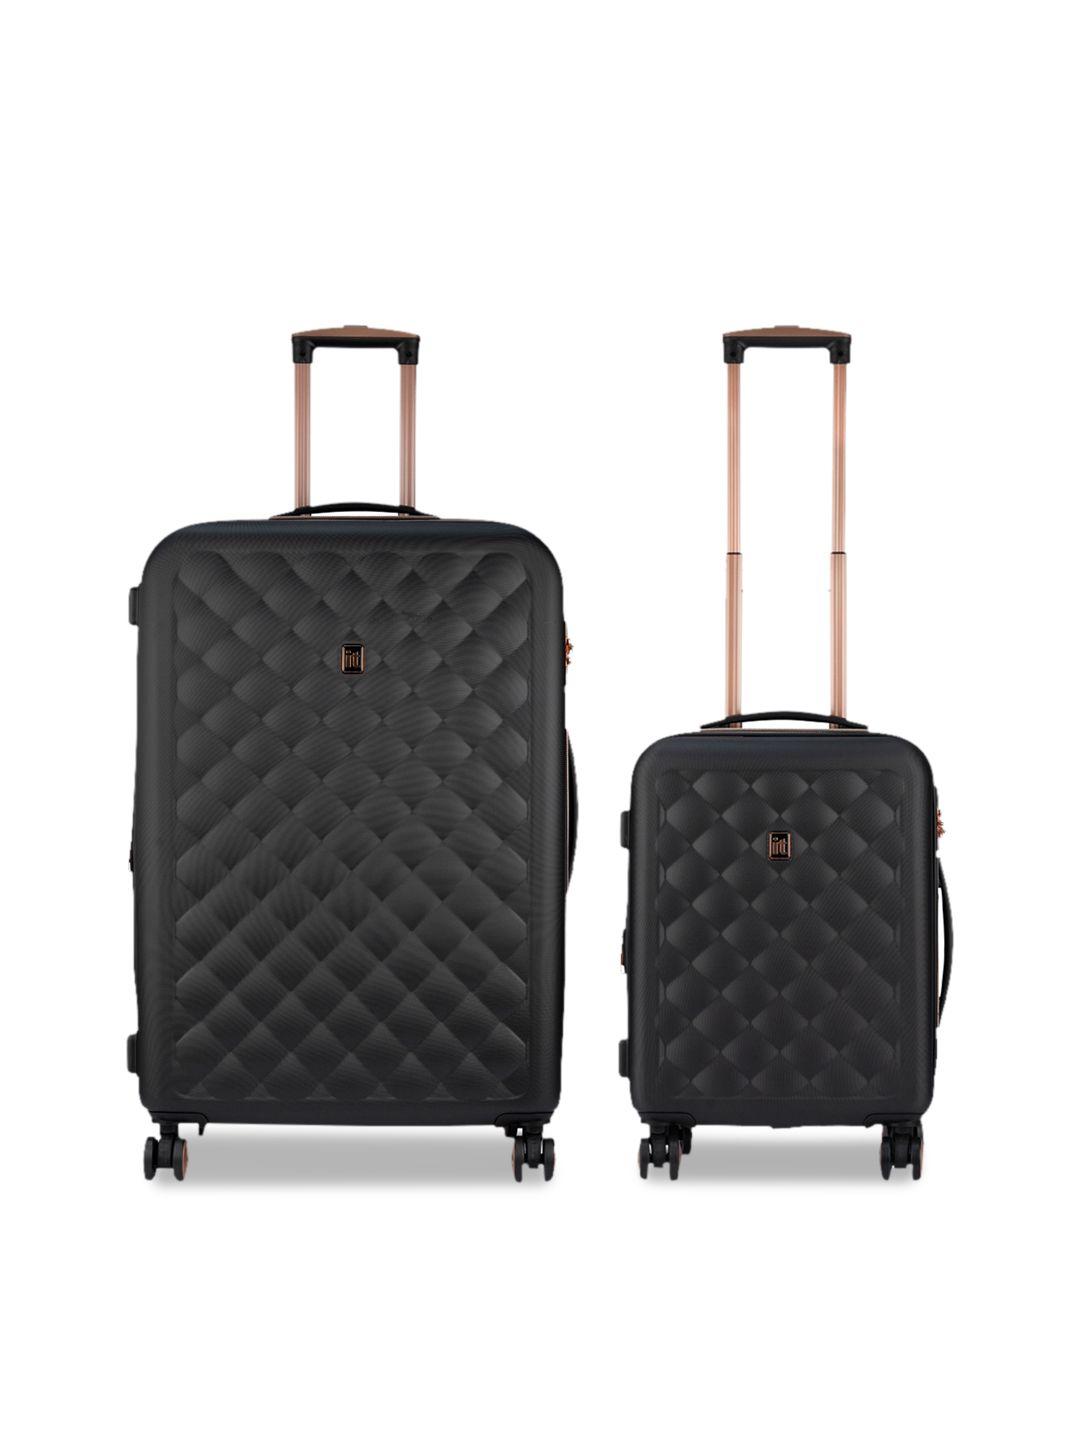 it luggage set of 2 black textured hard-sided trolley bags